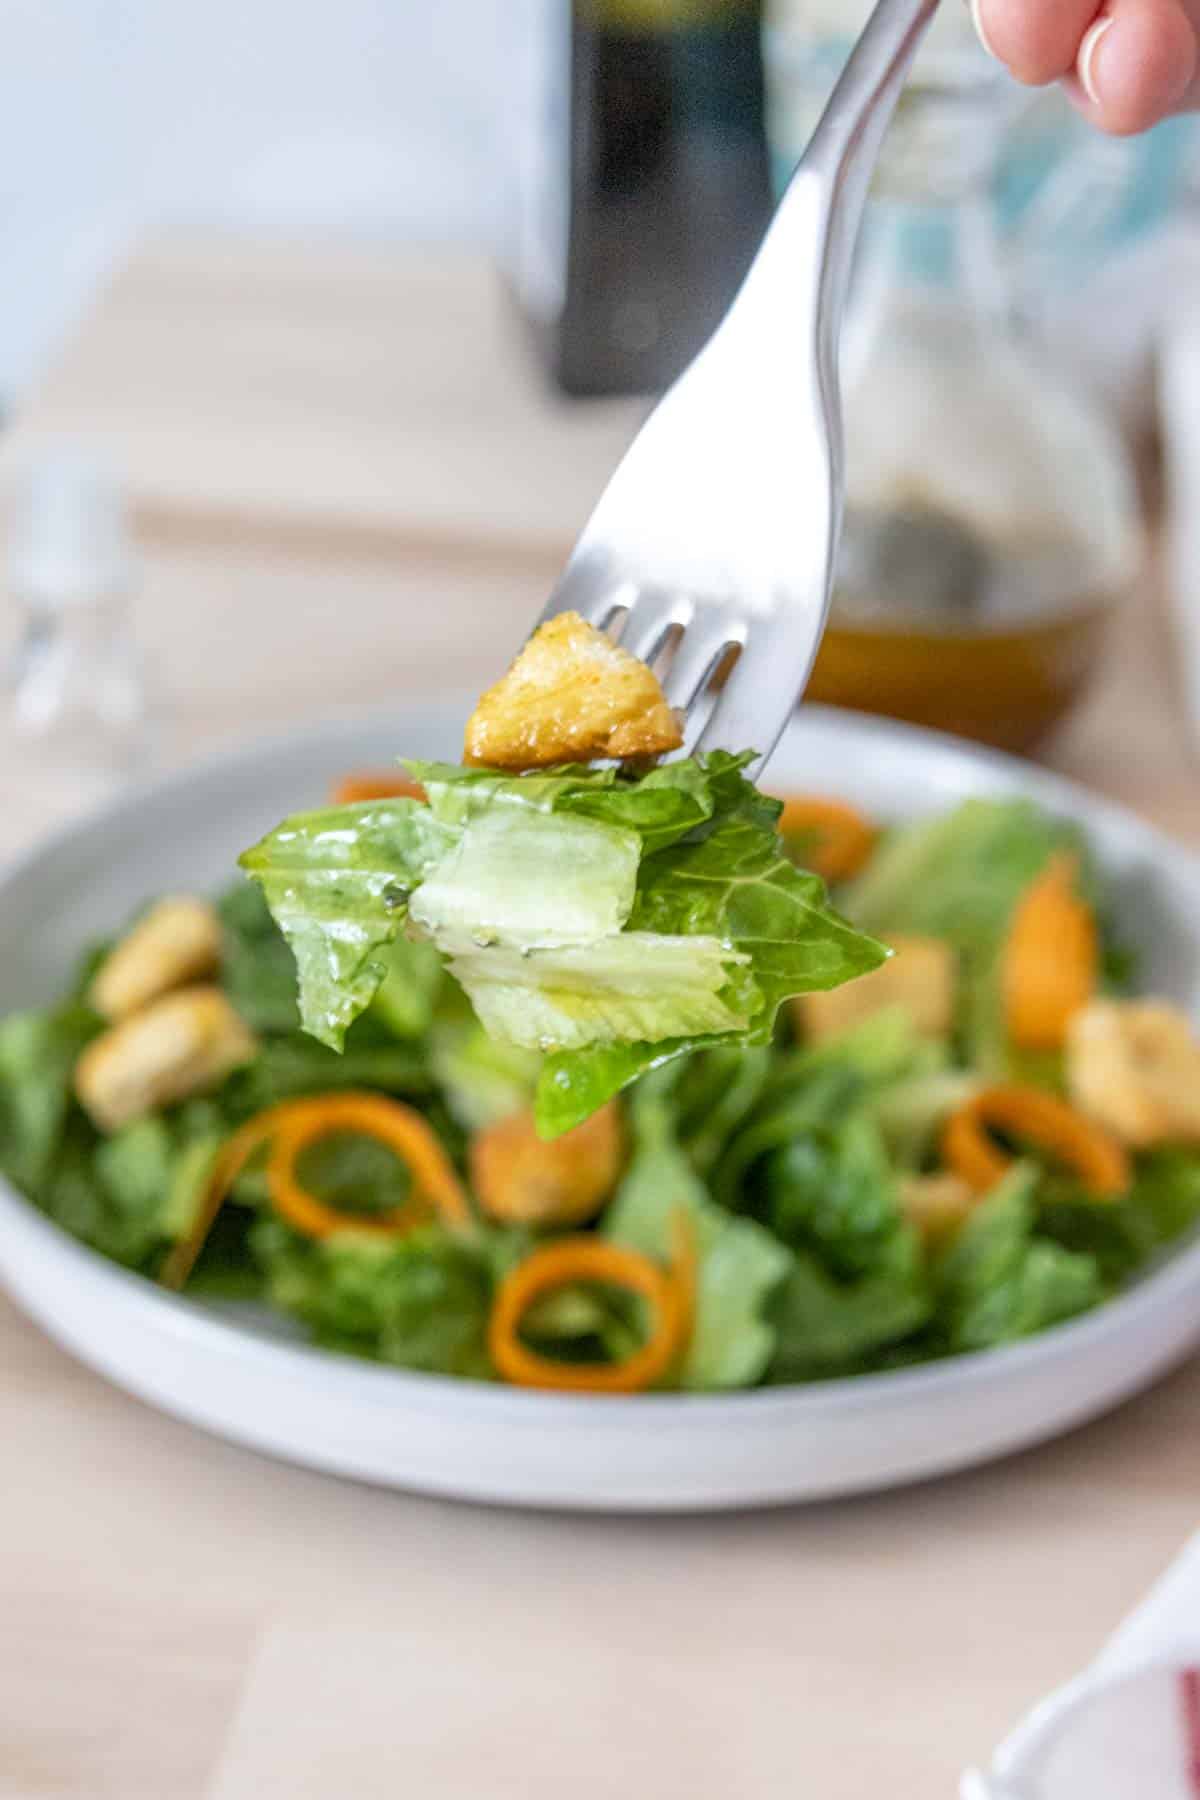 Fork holding salad and crouton.